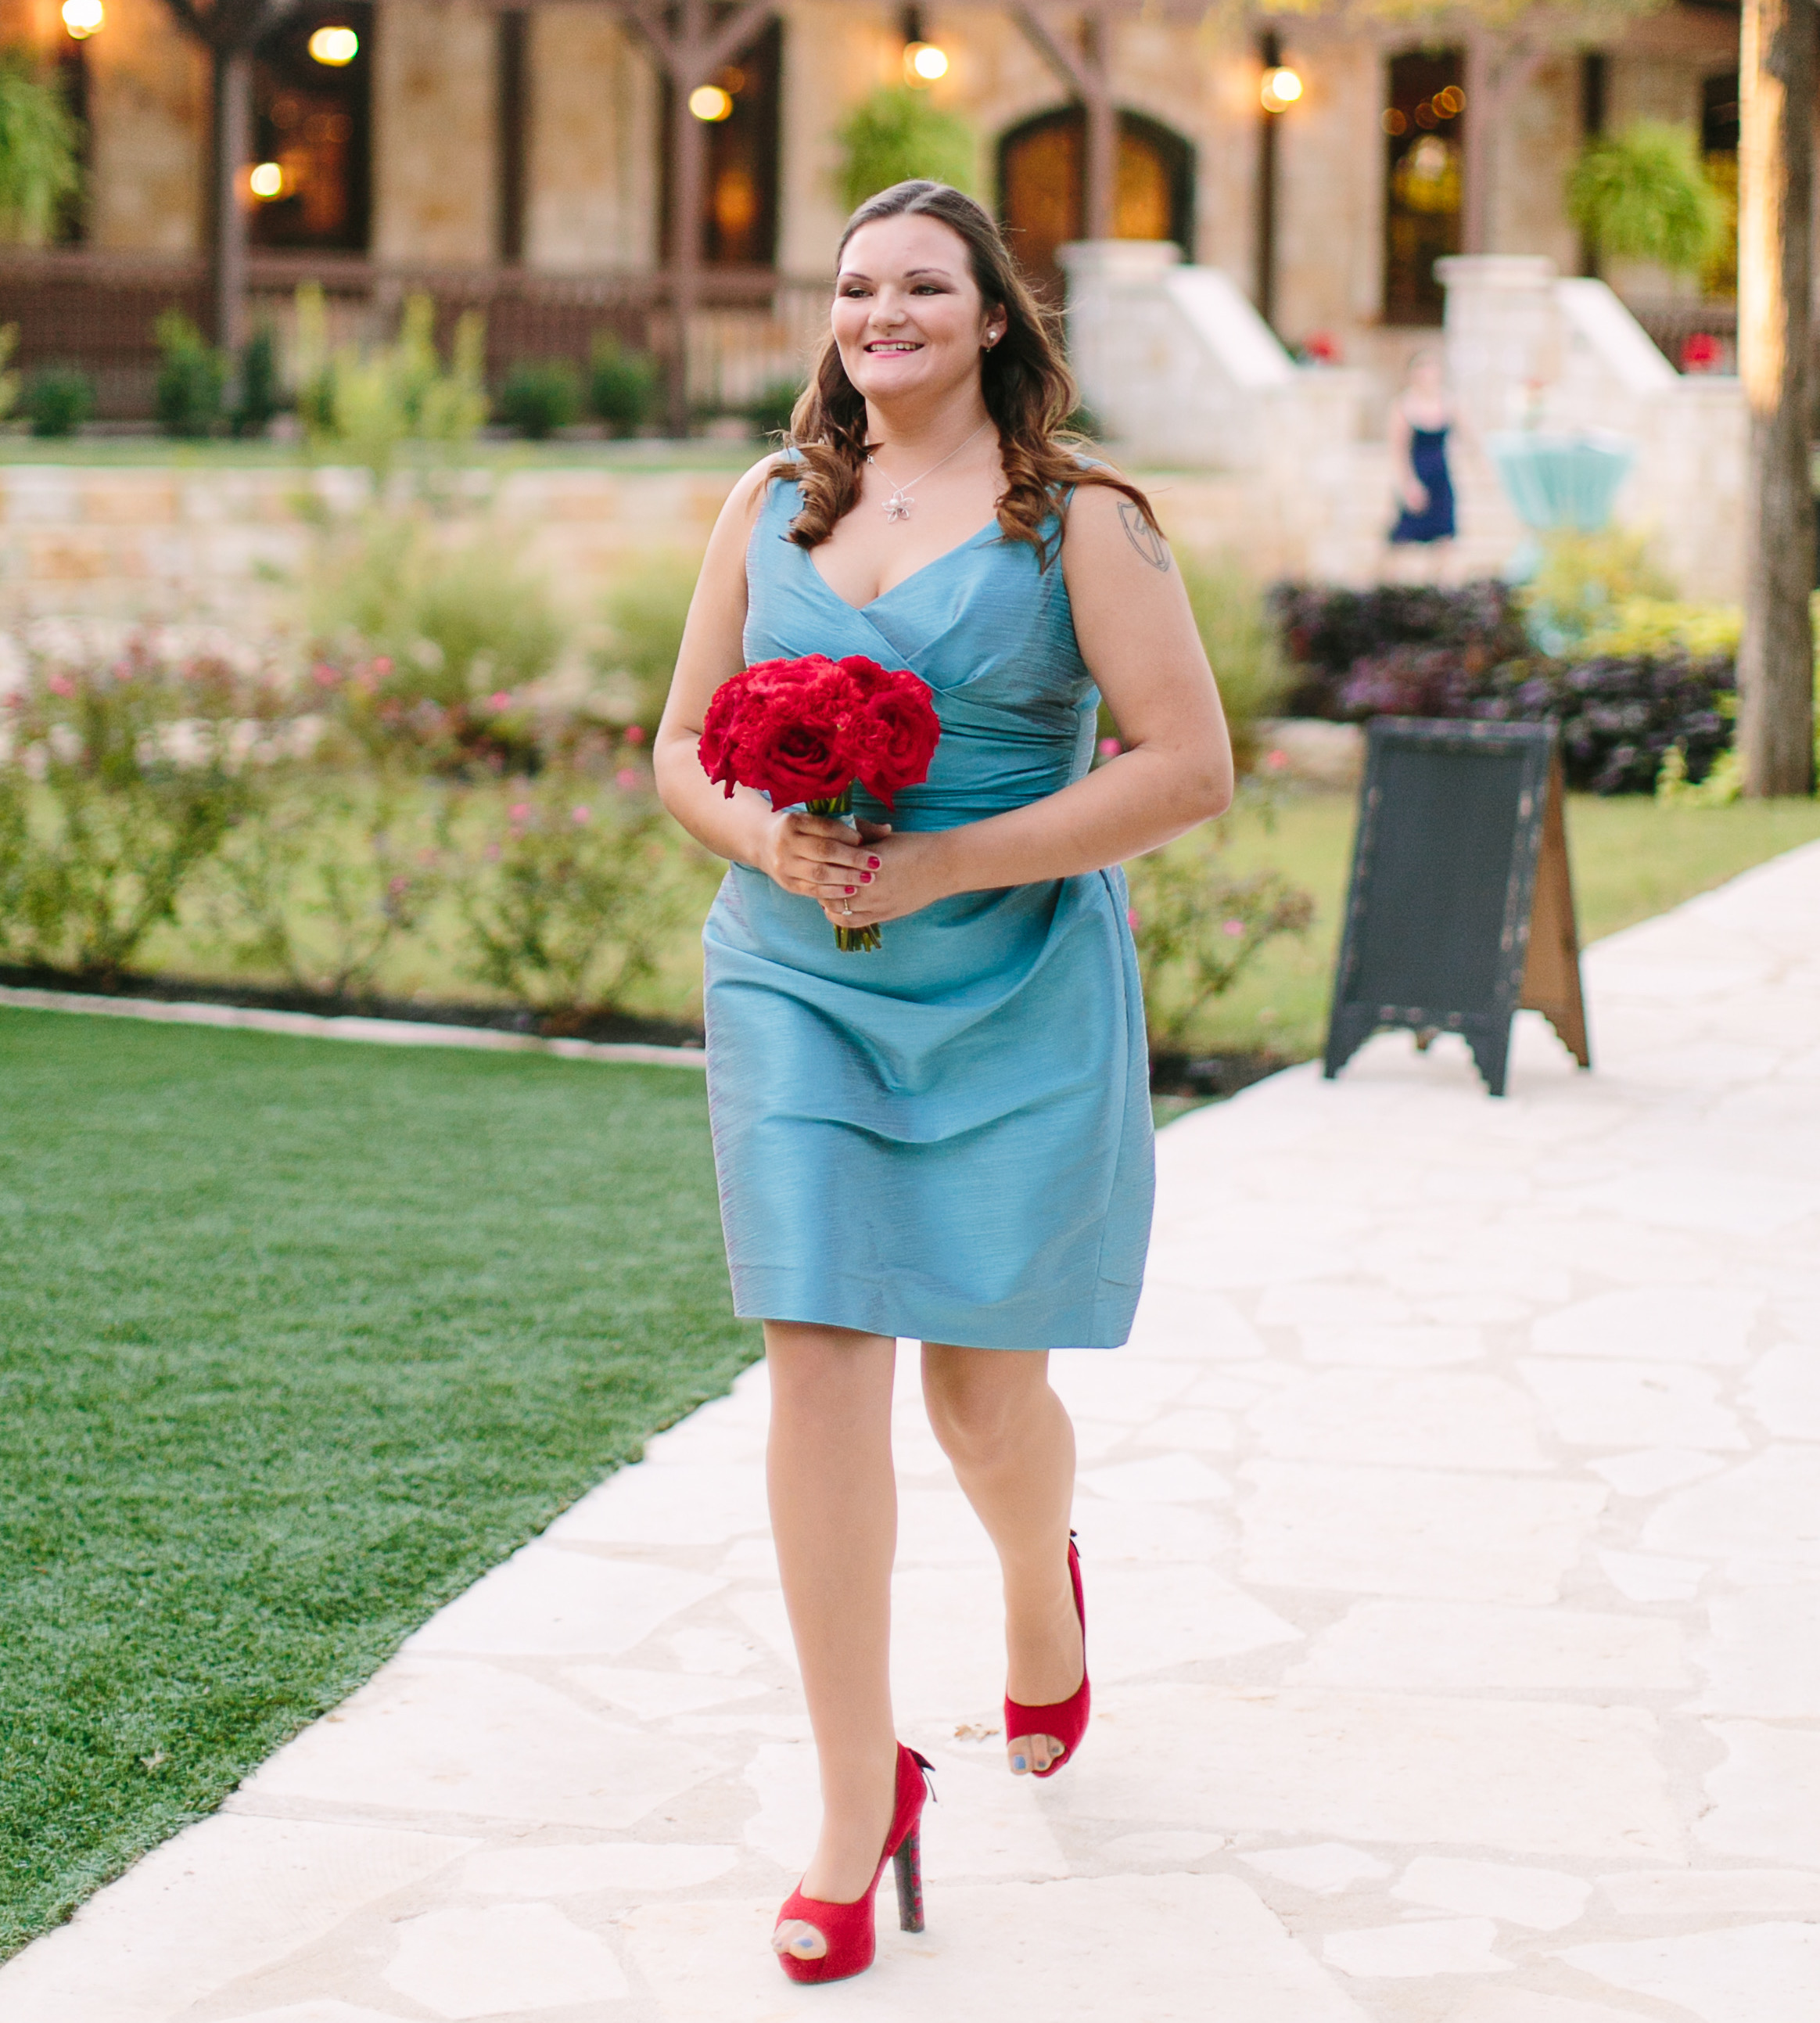 A Bridesmaid walks down the aisle wearing a teal dress and red shoes